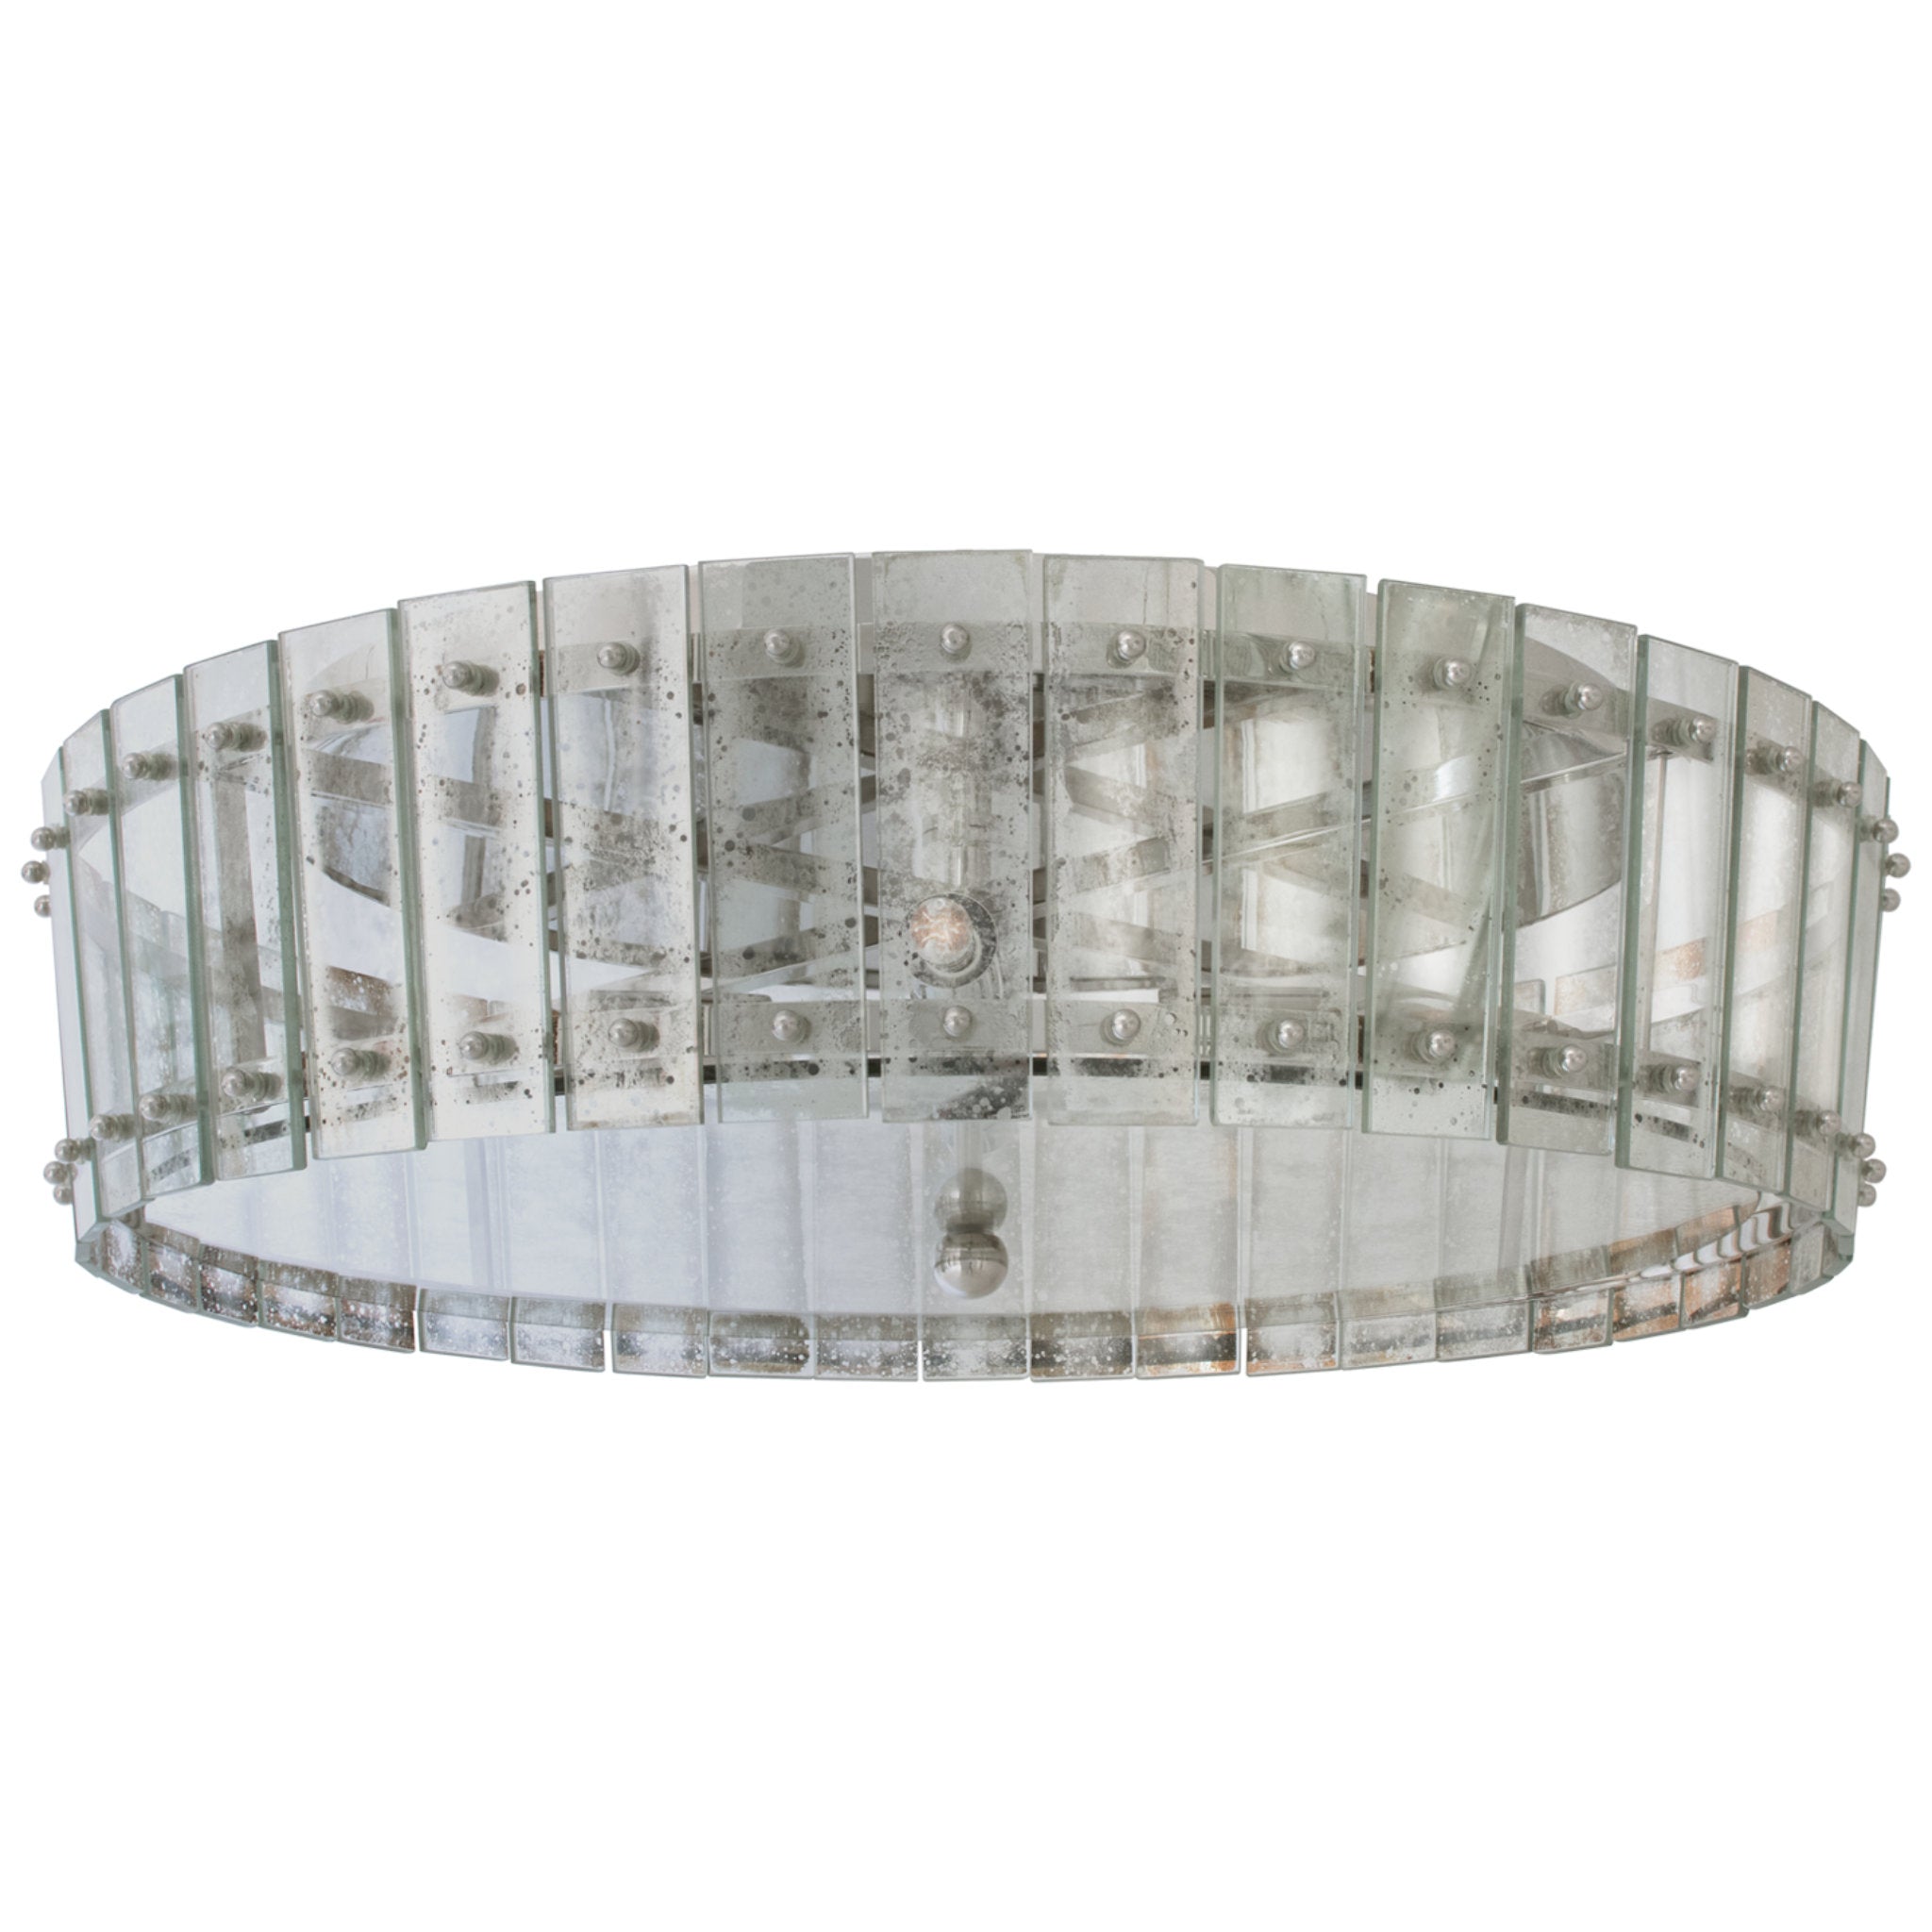 Carrier and Company Cadence Large Single-Tier Flush Mount in Polished Nickel with Antique Mirror